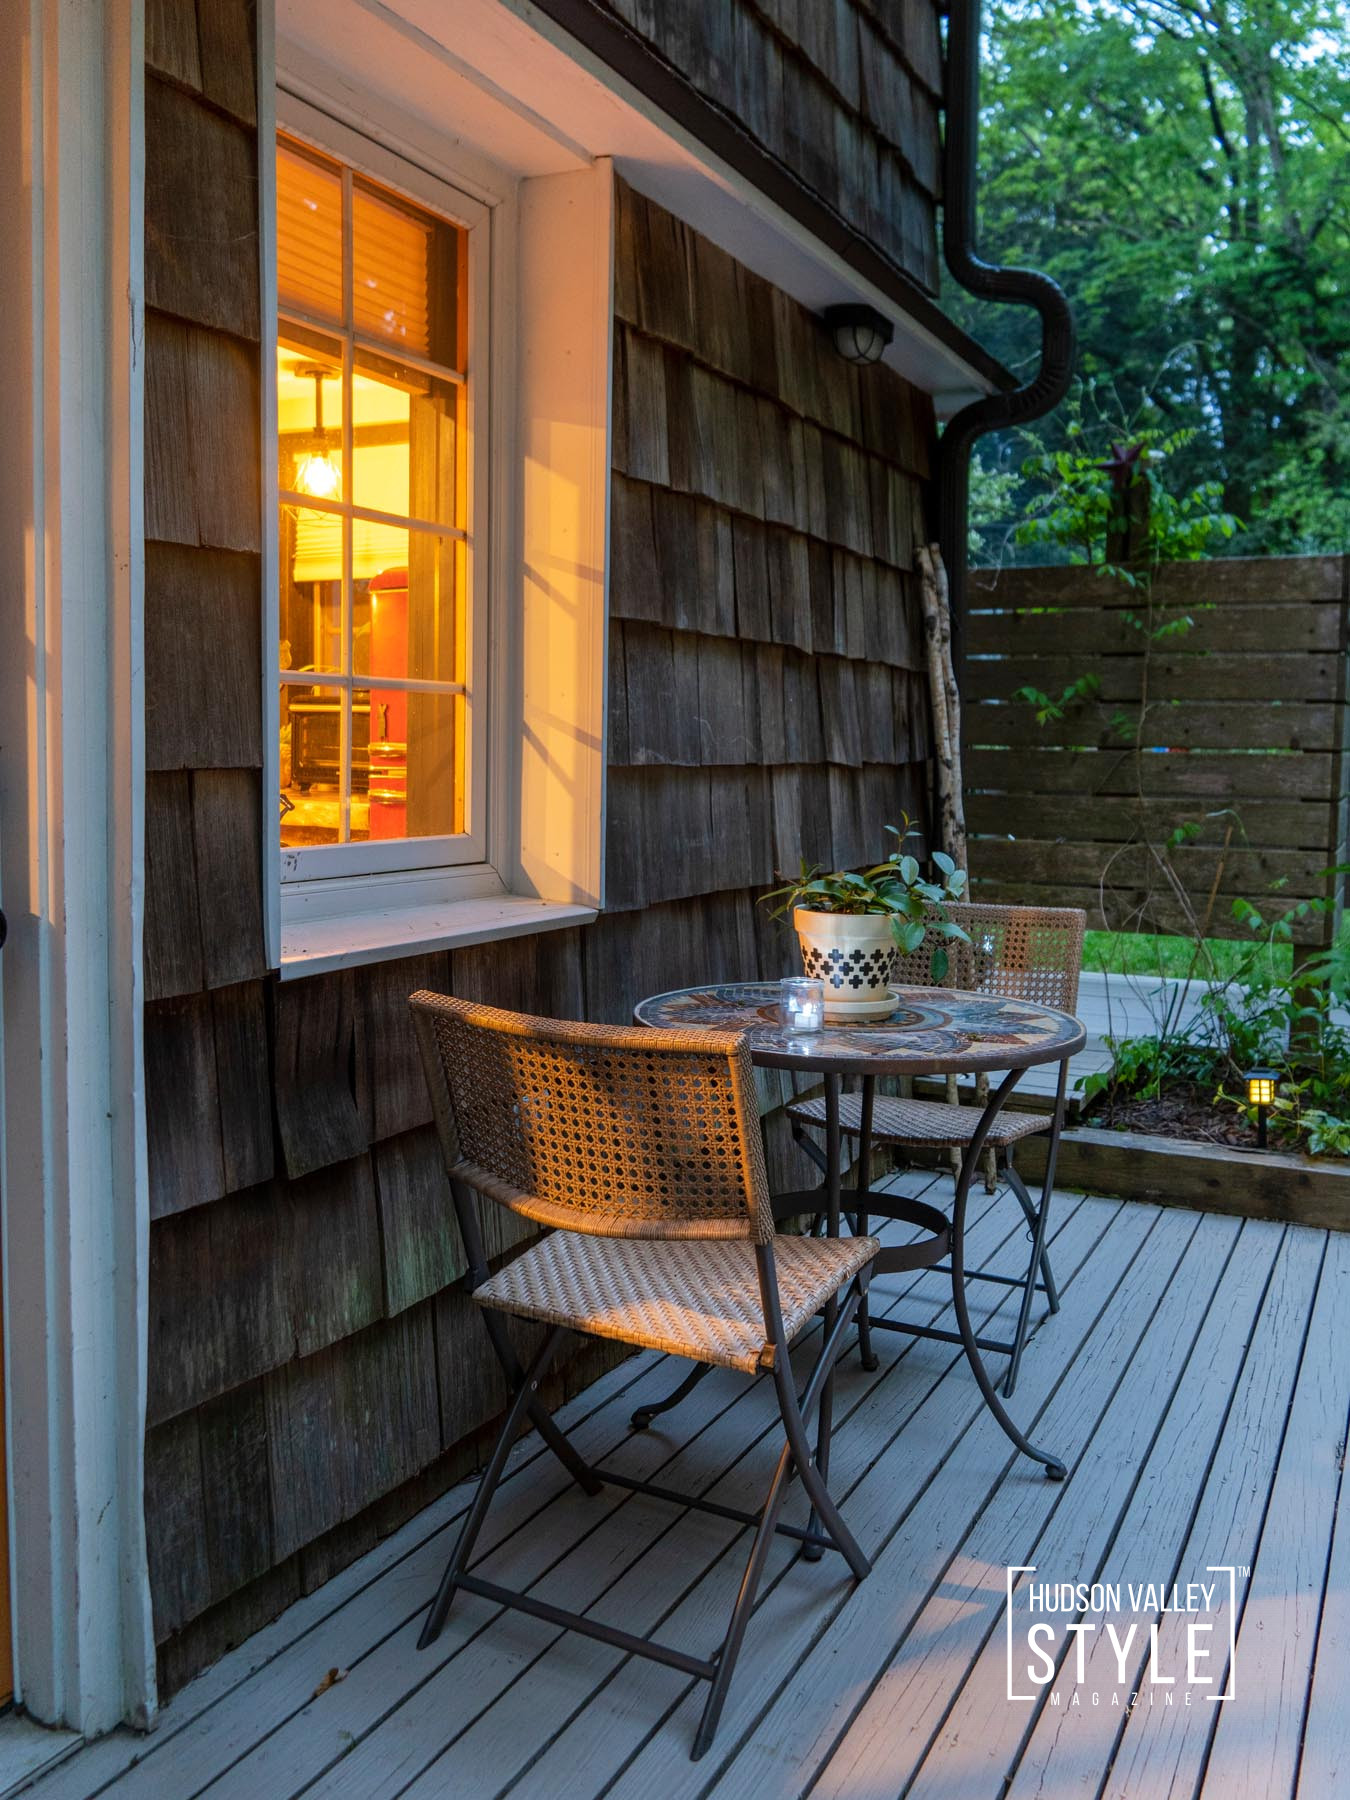 Discover the Magical Airbnb Cottage Surrounded by Leafy Garden in Woodstock, NY – Airbnb Photography Tour by Maxwell Alexander / ALLUVION MEDIA